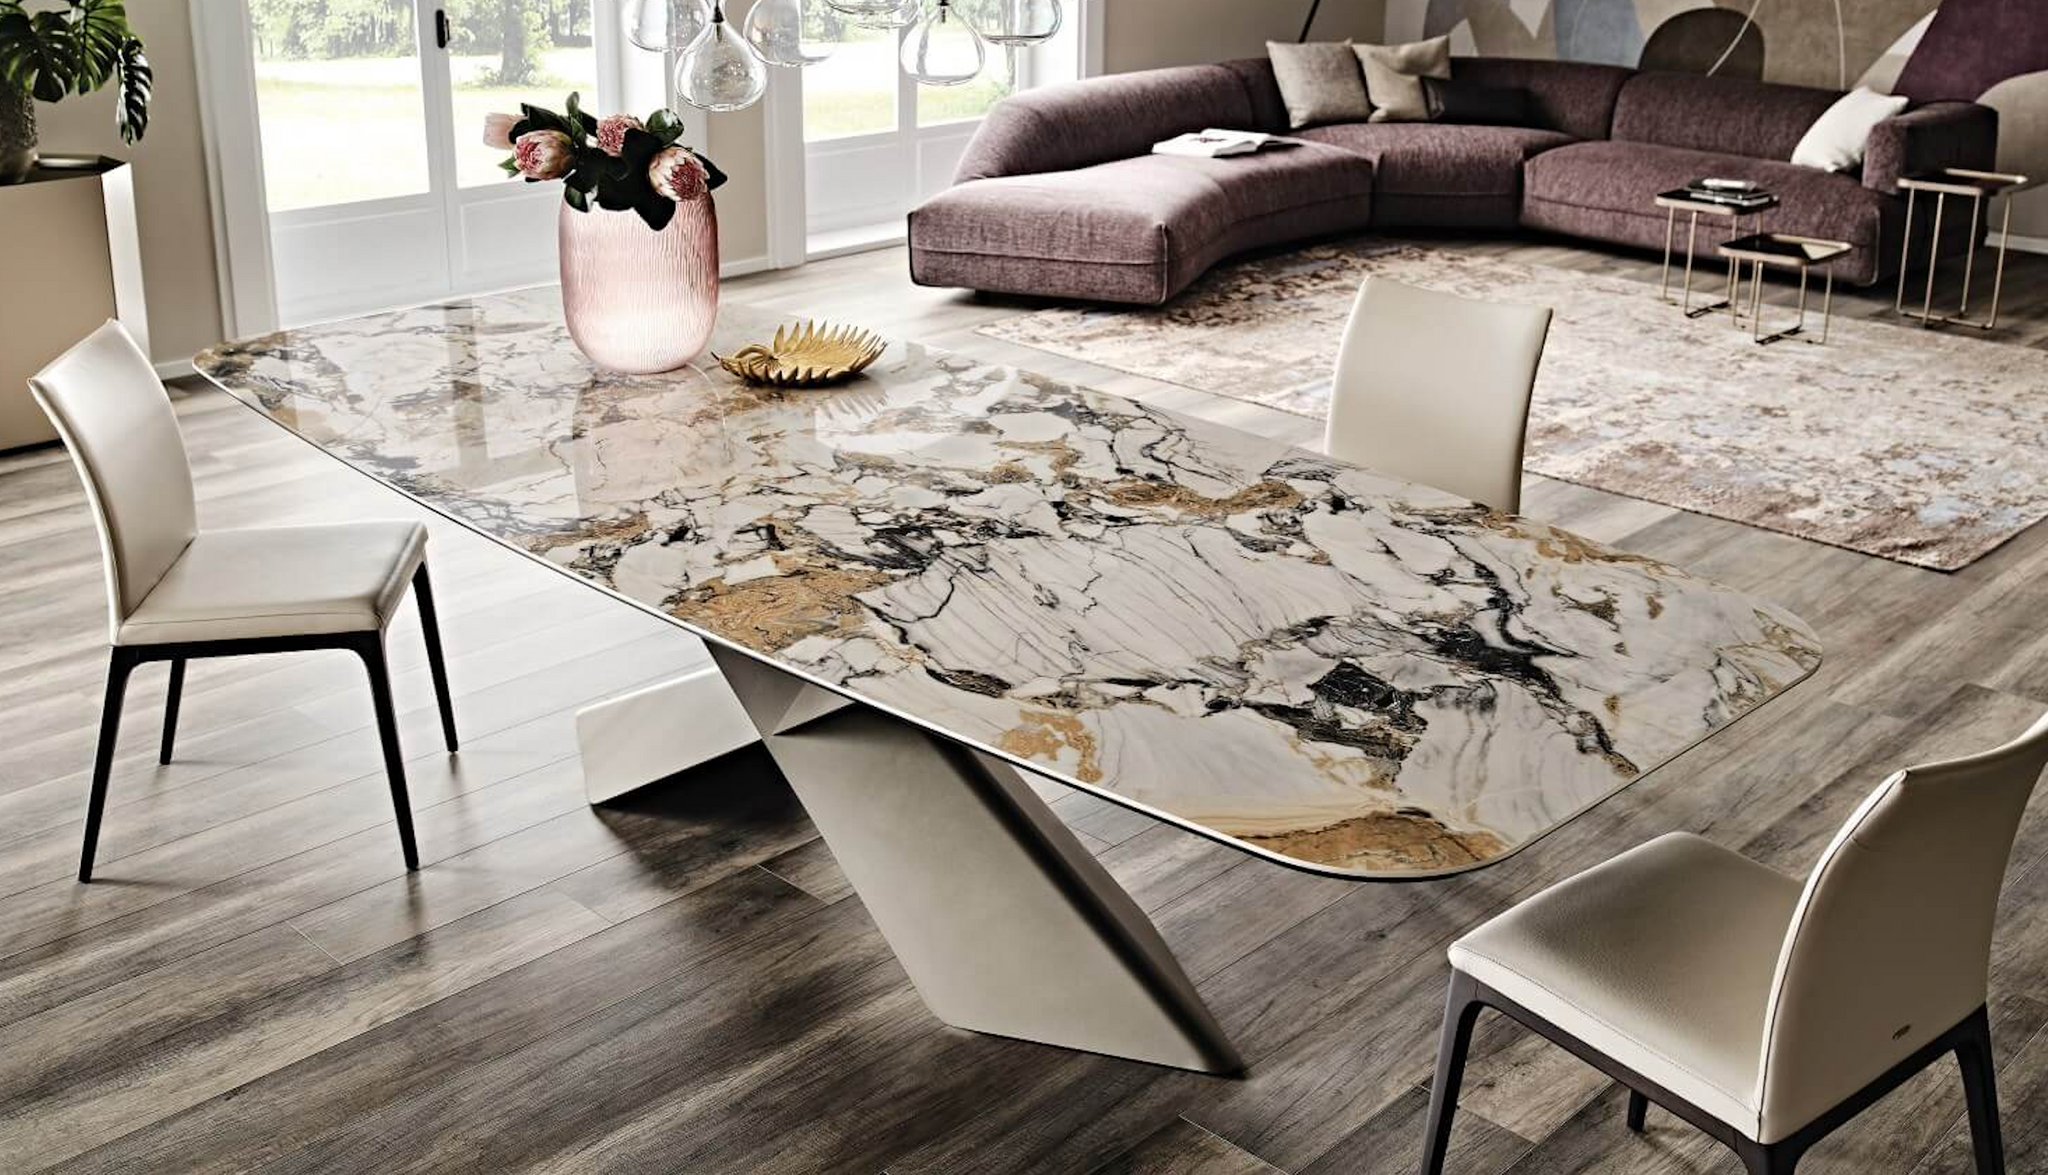 How to choose the right dining table top for your home